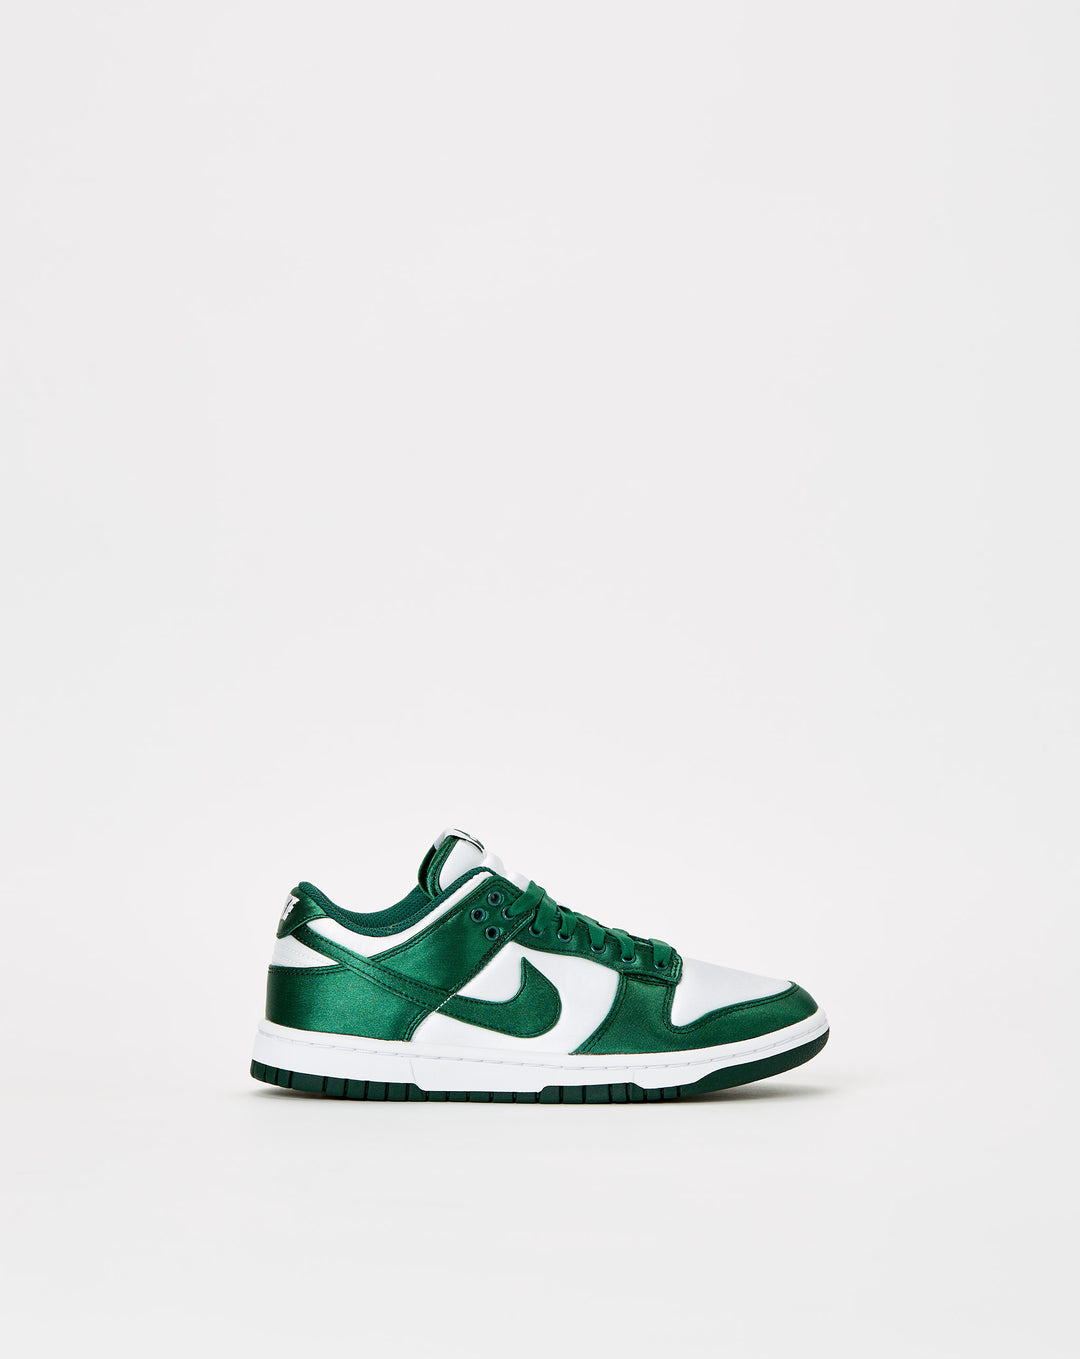 Nike Dunk Low Green Satin DX5931-100 Release